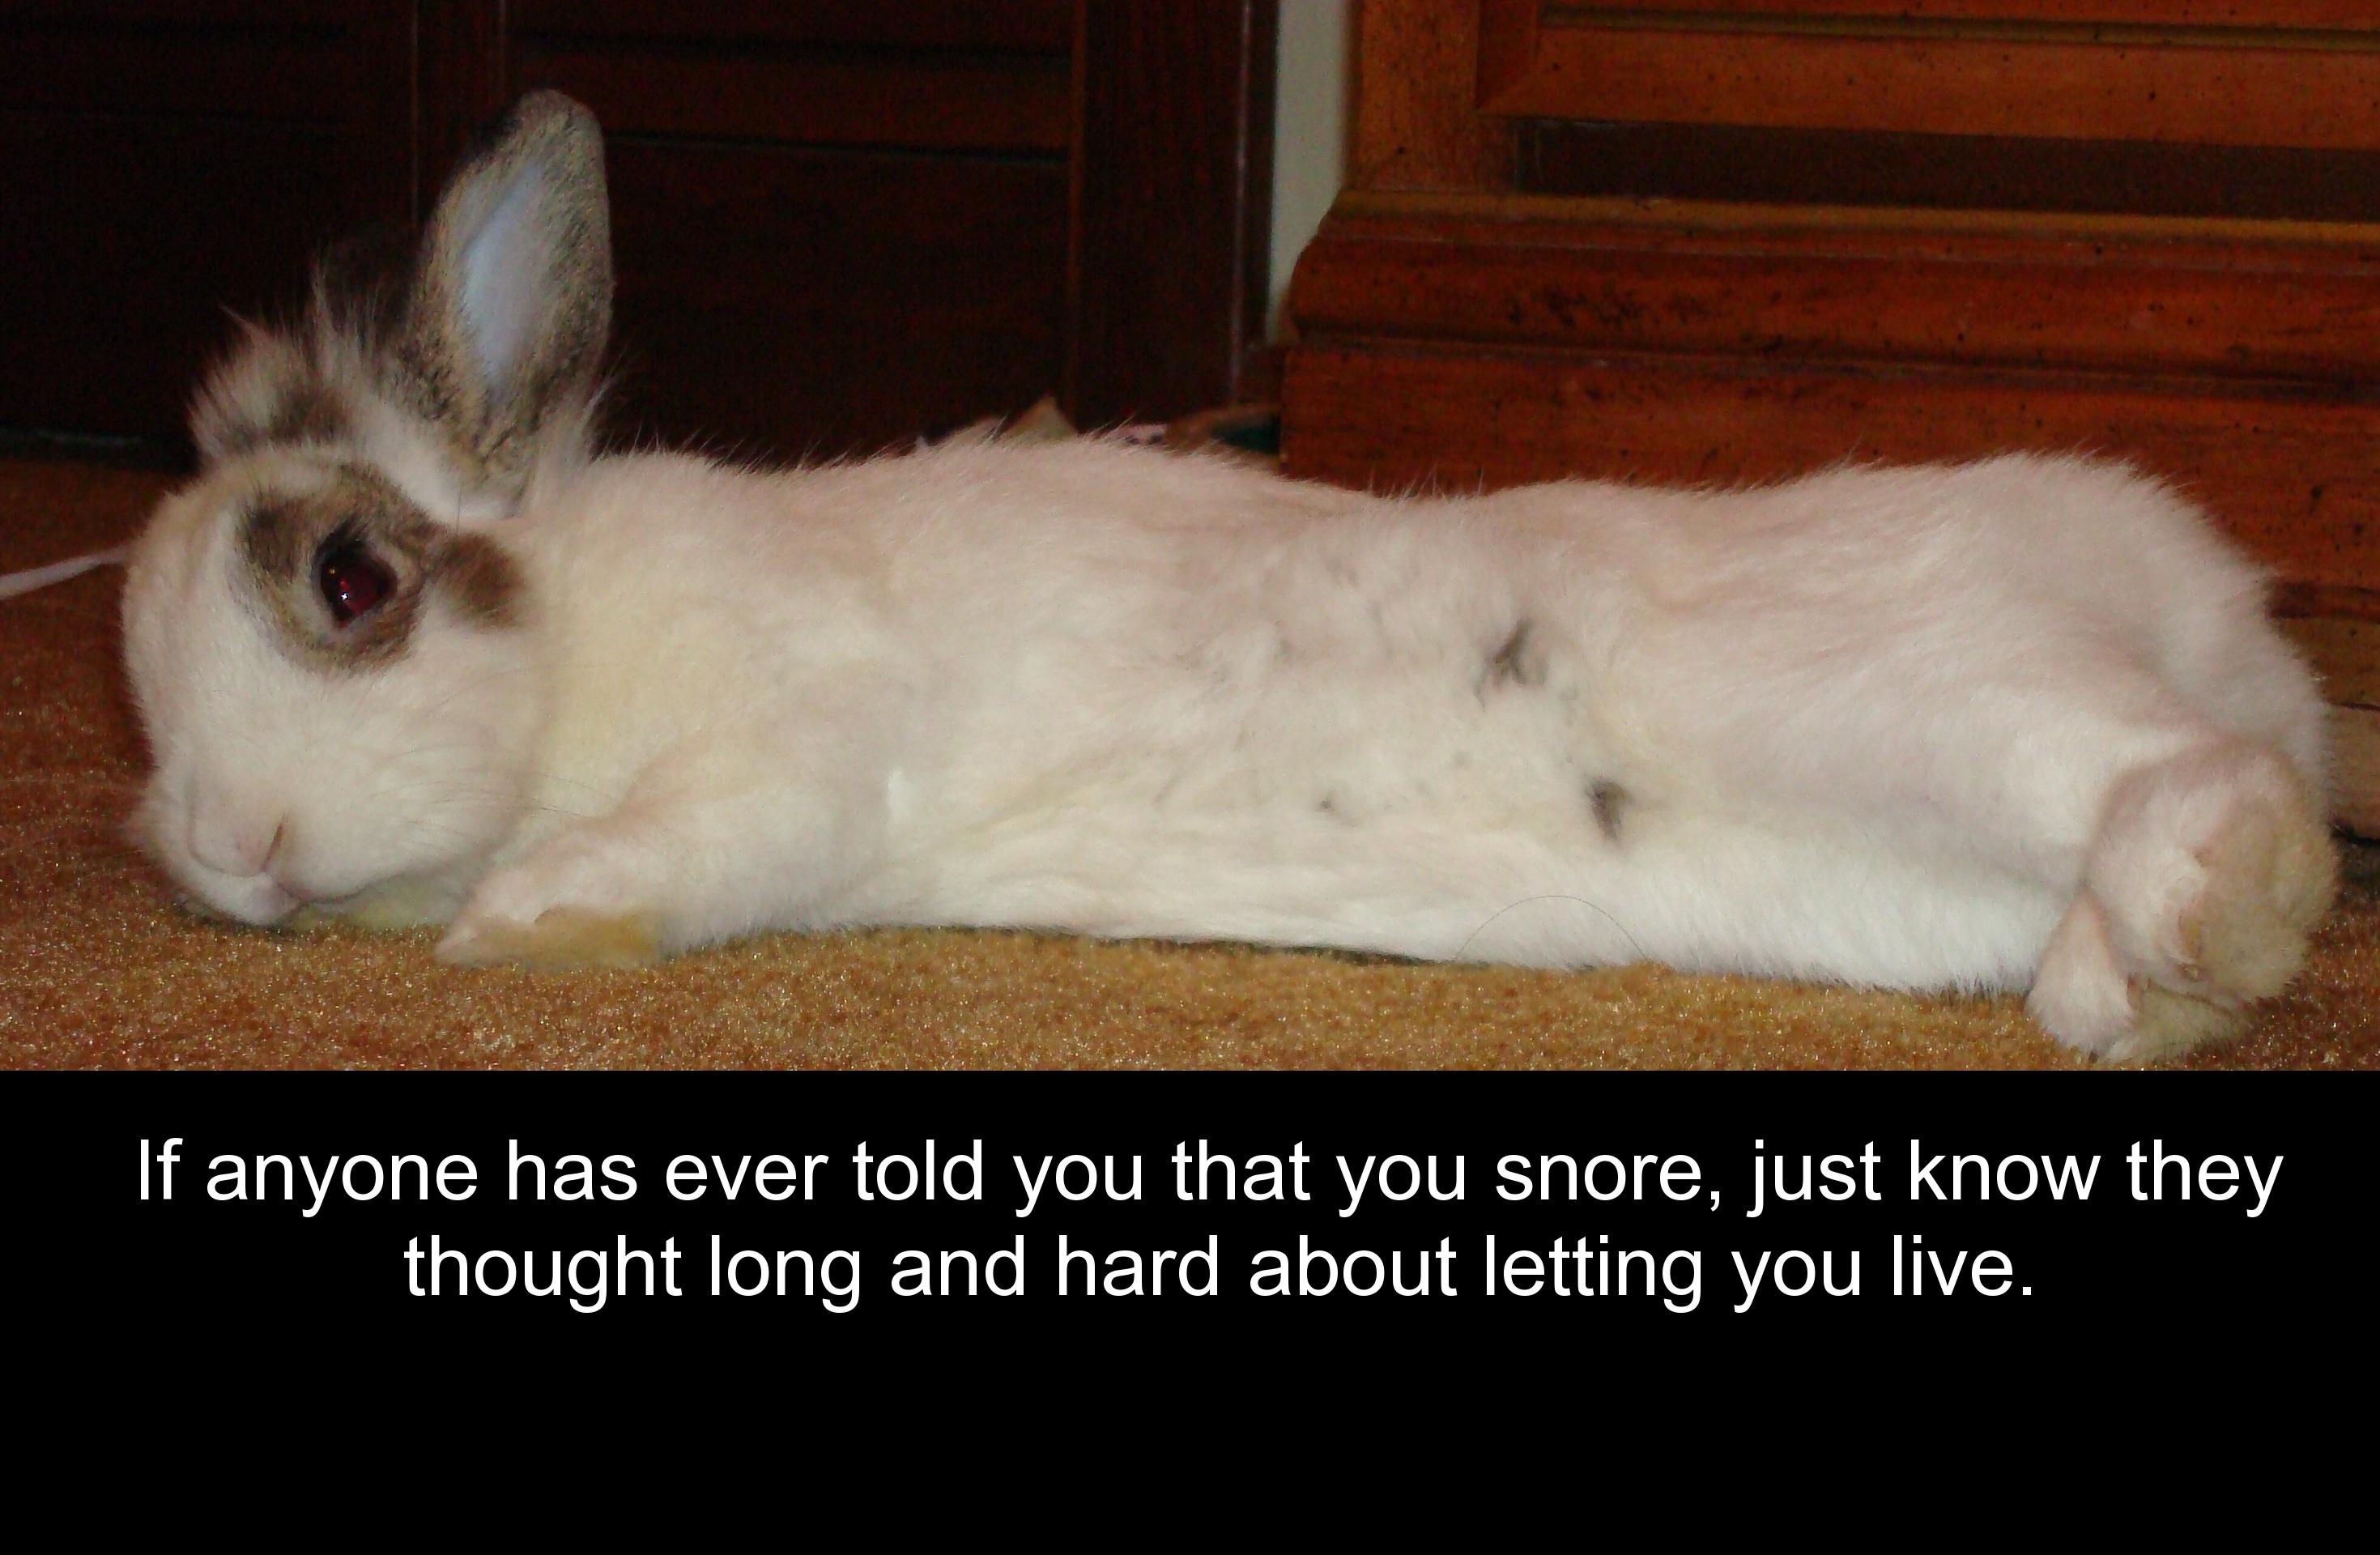 fauna - If anyone has ever told you that you snore, just know they thought long and hard about letting you live.